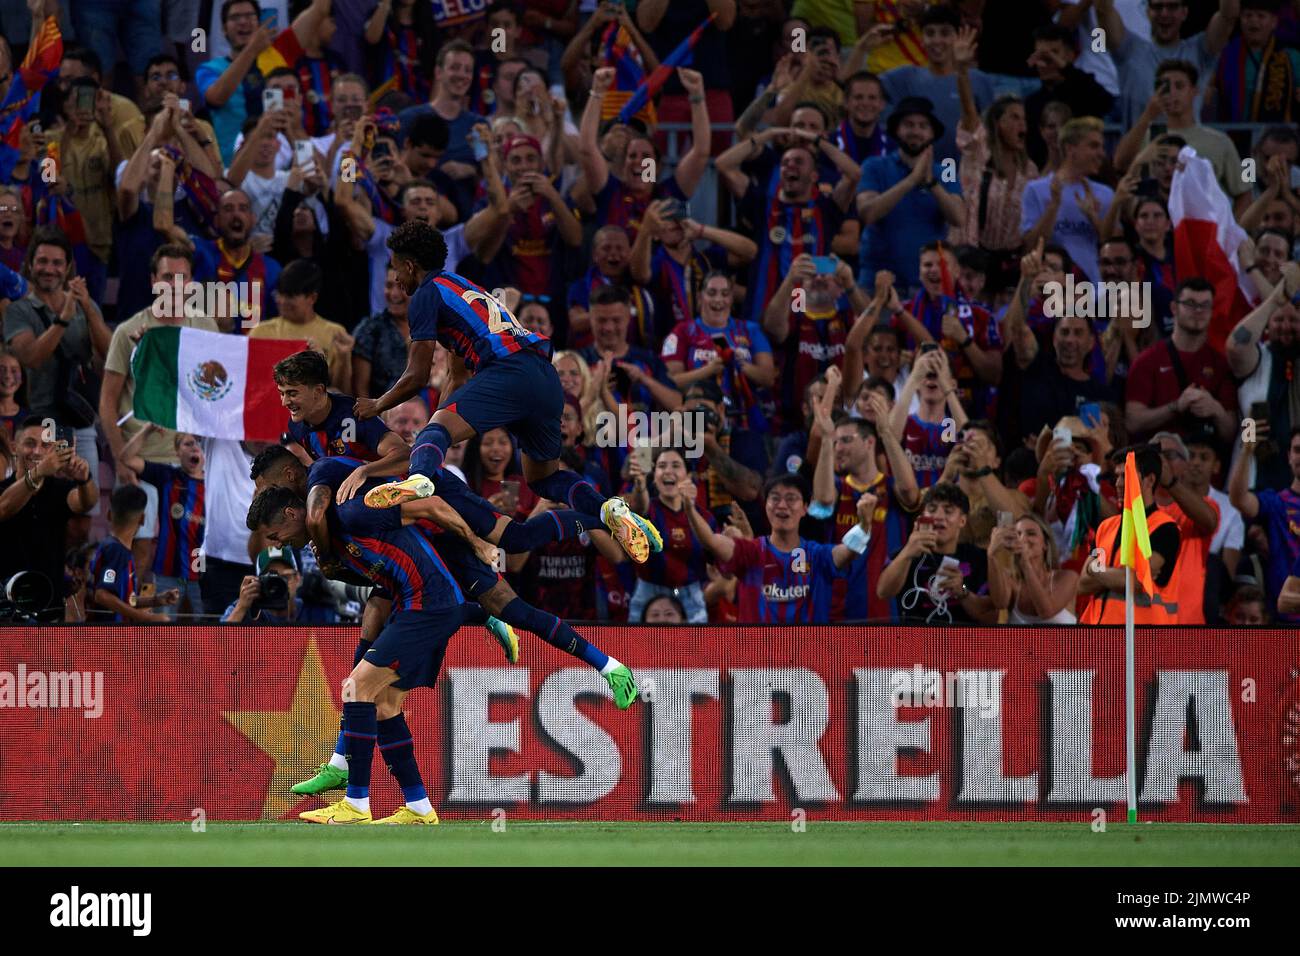 Barcelona, Barcelona. 7th Aug, 2022. Barcelona's players celebrate a goal during the 2022 Joan Gamper Trophy friendly football match between FC Barcelona of Spain and Pumas UNAM of Mexico, in Barcelona, Spain on Aug. 7, 2022. Credit: Pablo Morano/Xinhua/Alamy Live News Stock Photo